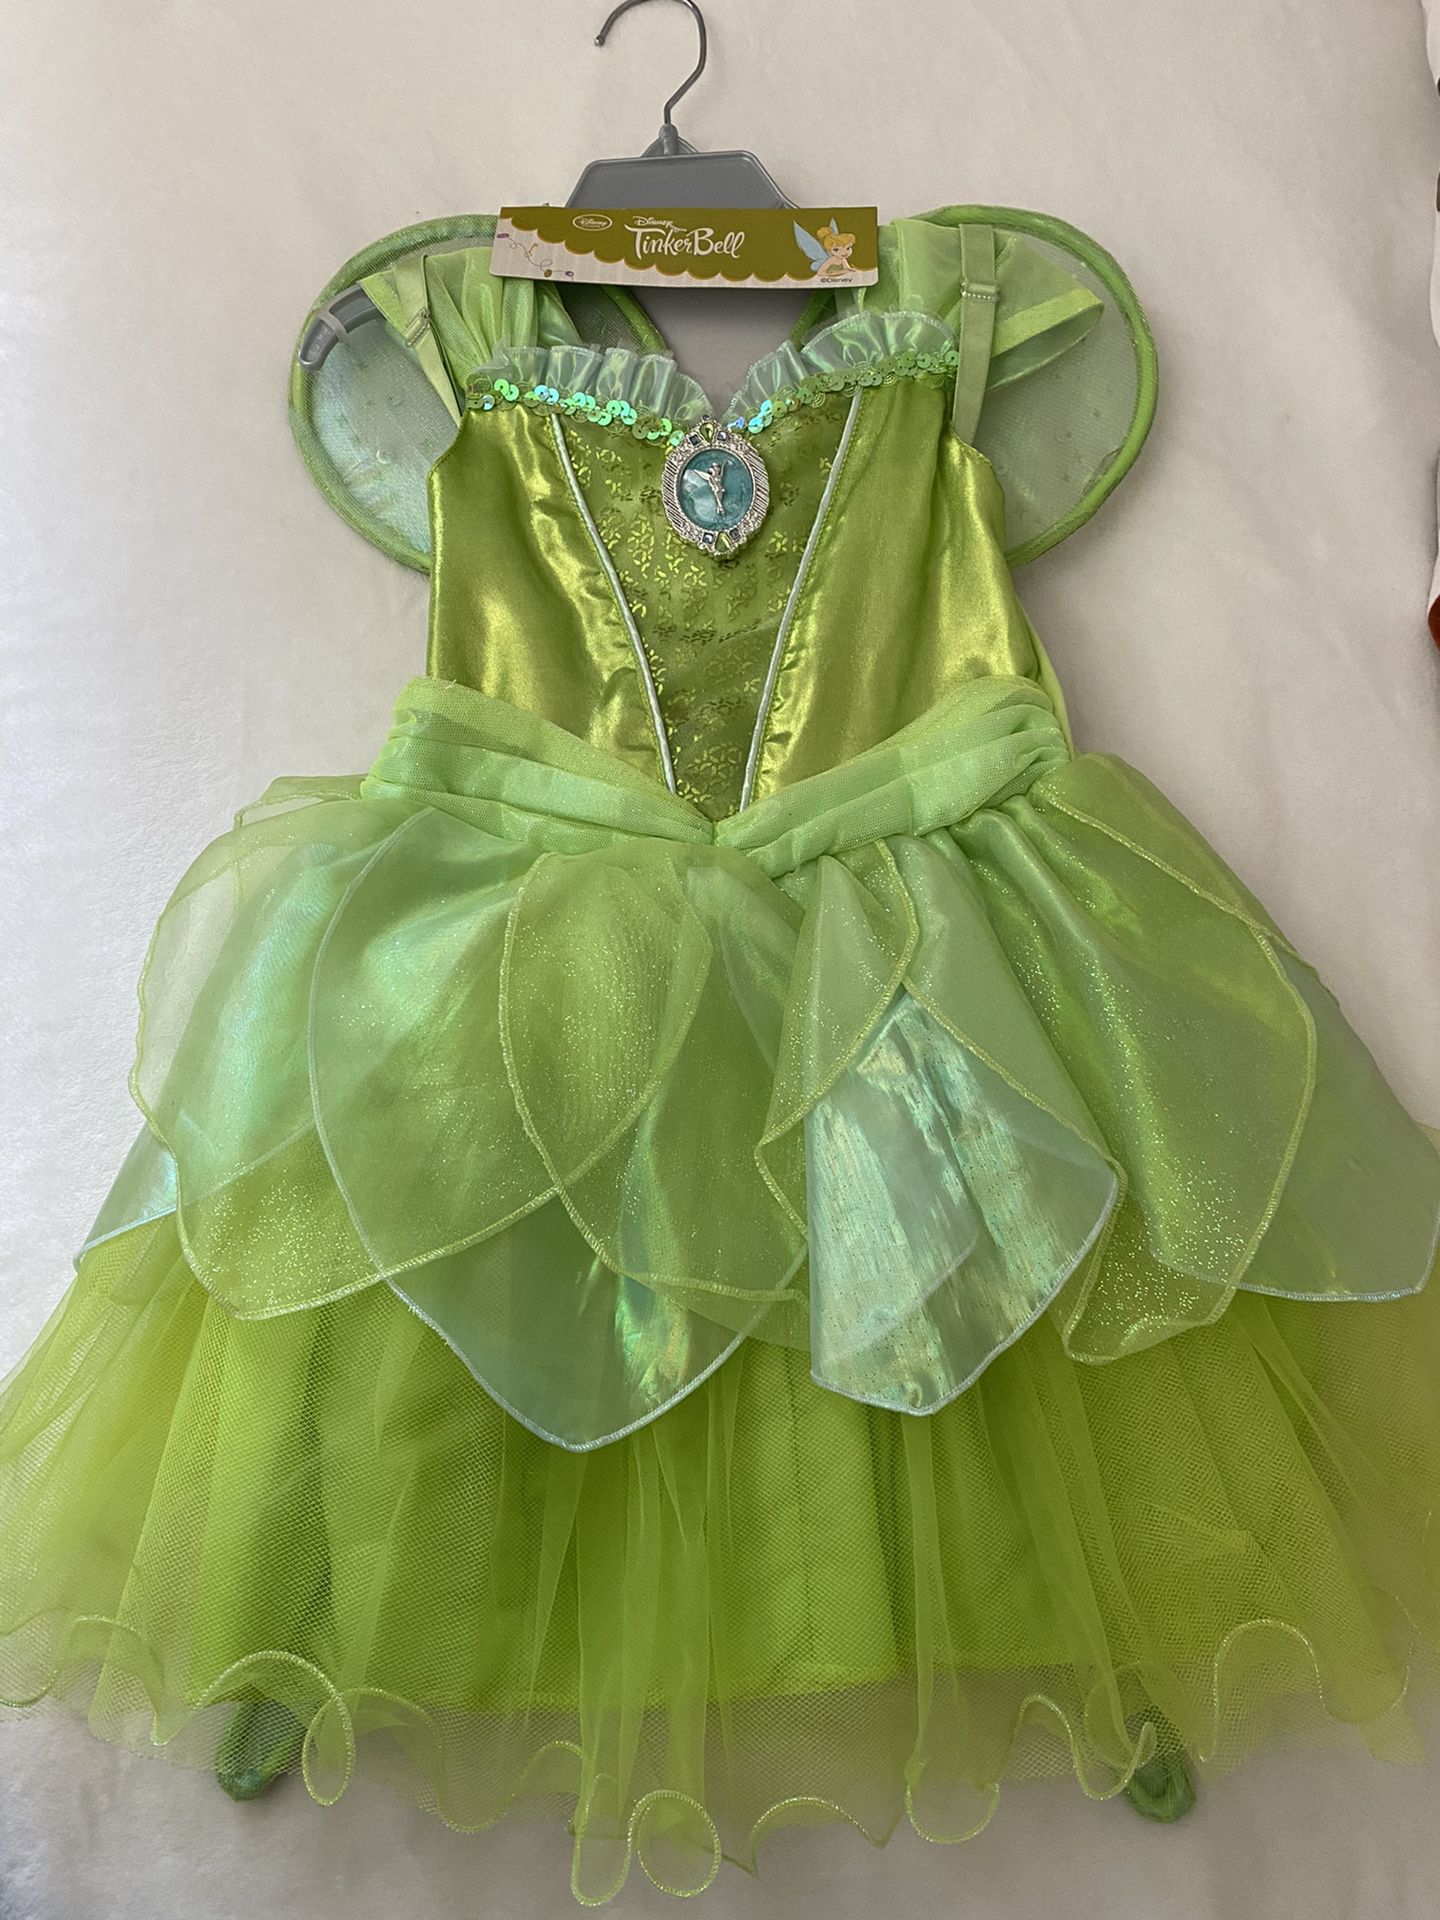 Tinkerbell Halloween costume size 3 dress and wings